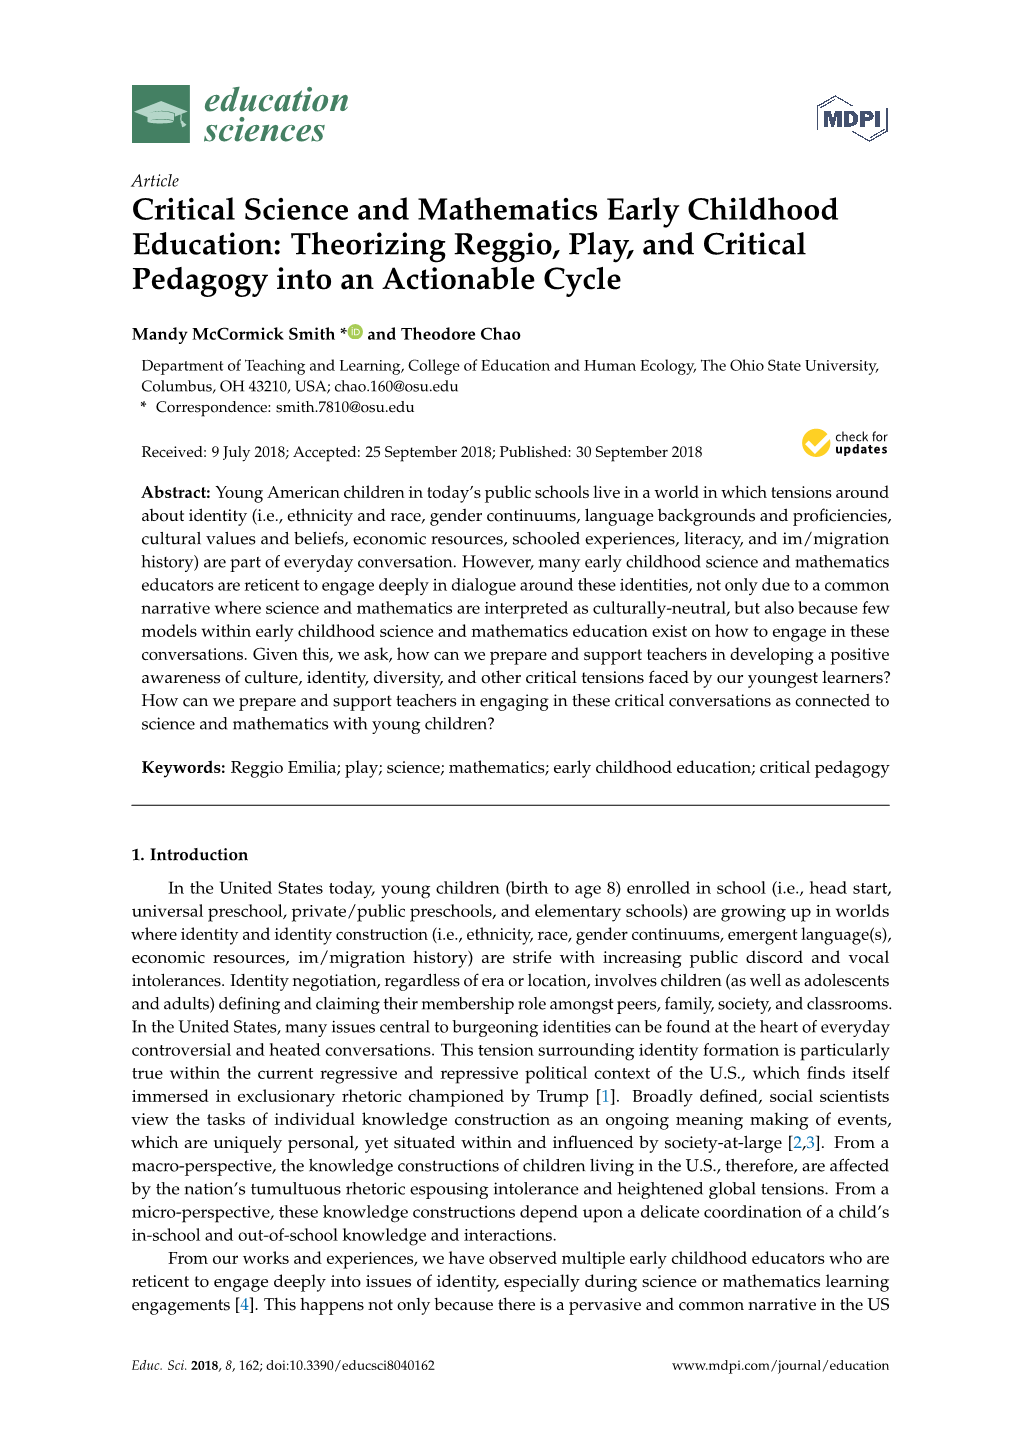 Critical Science and Mathematics Early Childhood Education: Theorizing Reggio, Play, and Critical Pedagogy Into an Actionable Cycle